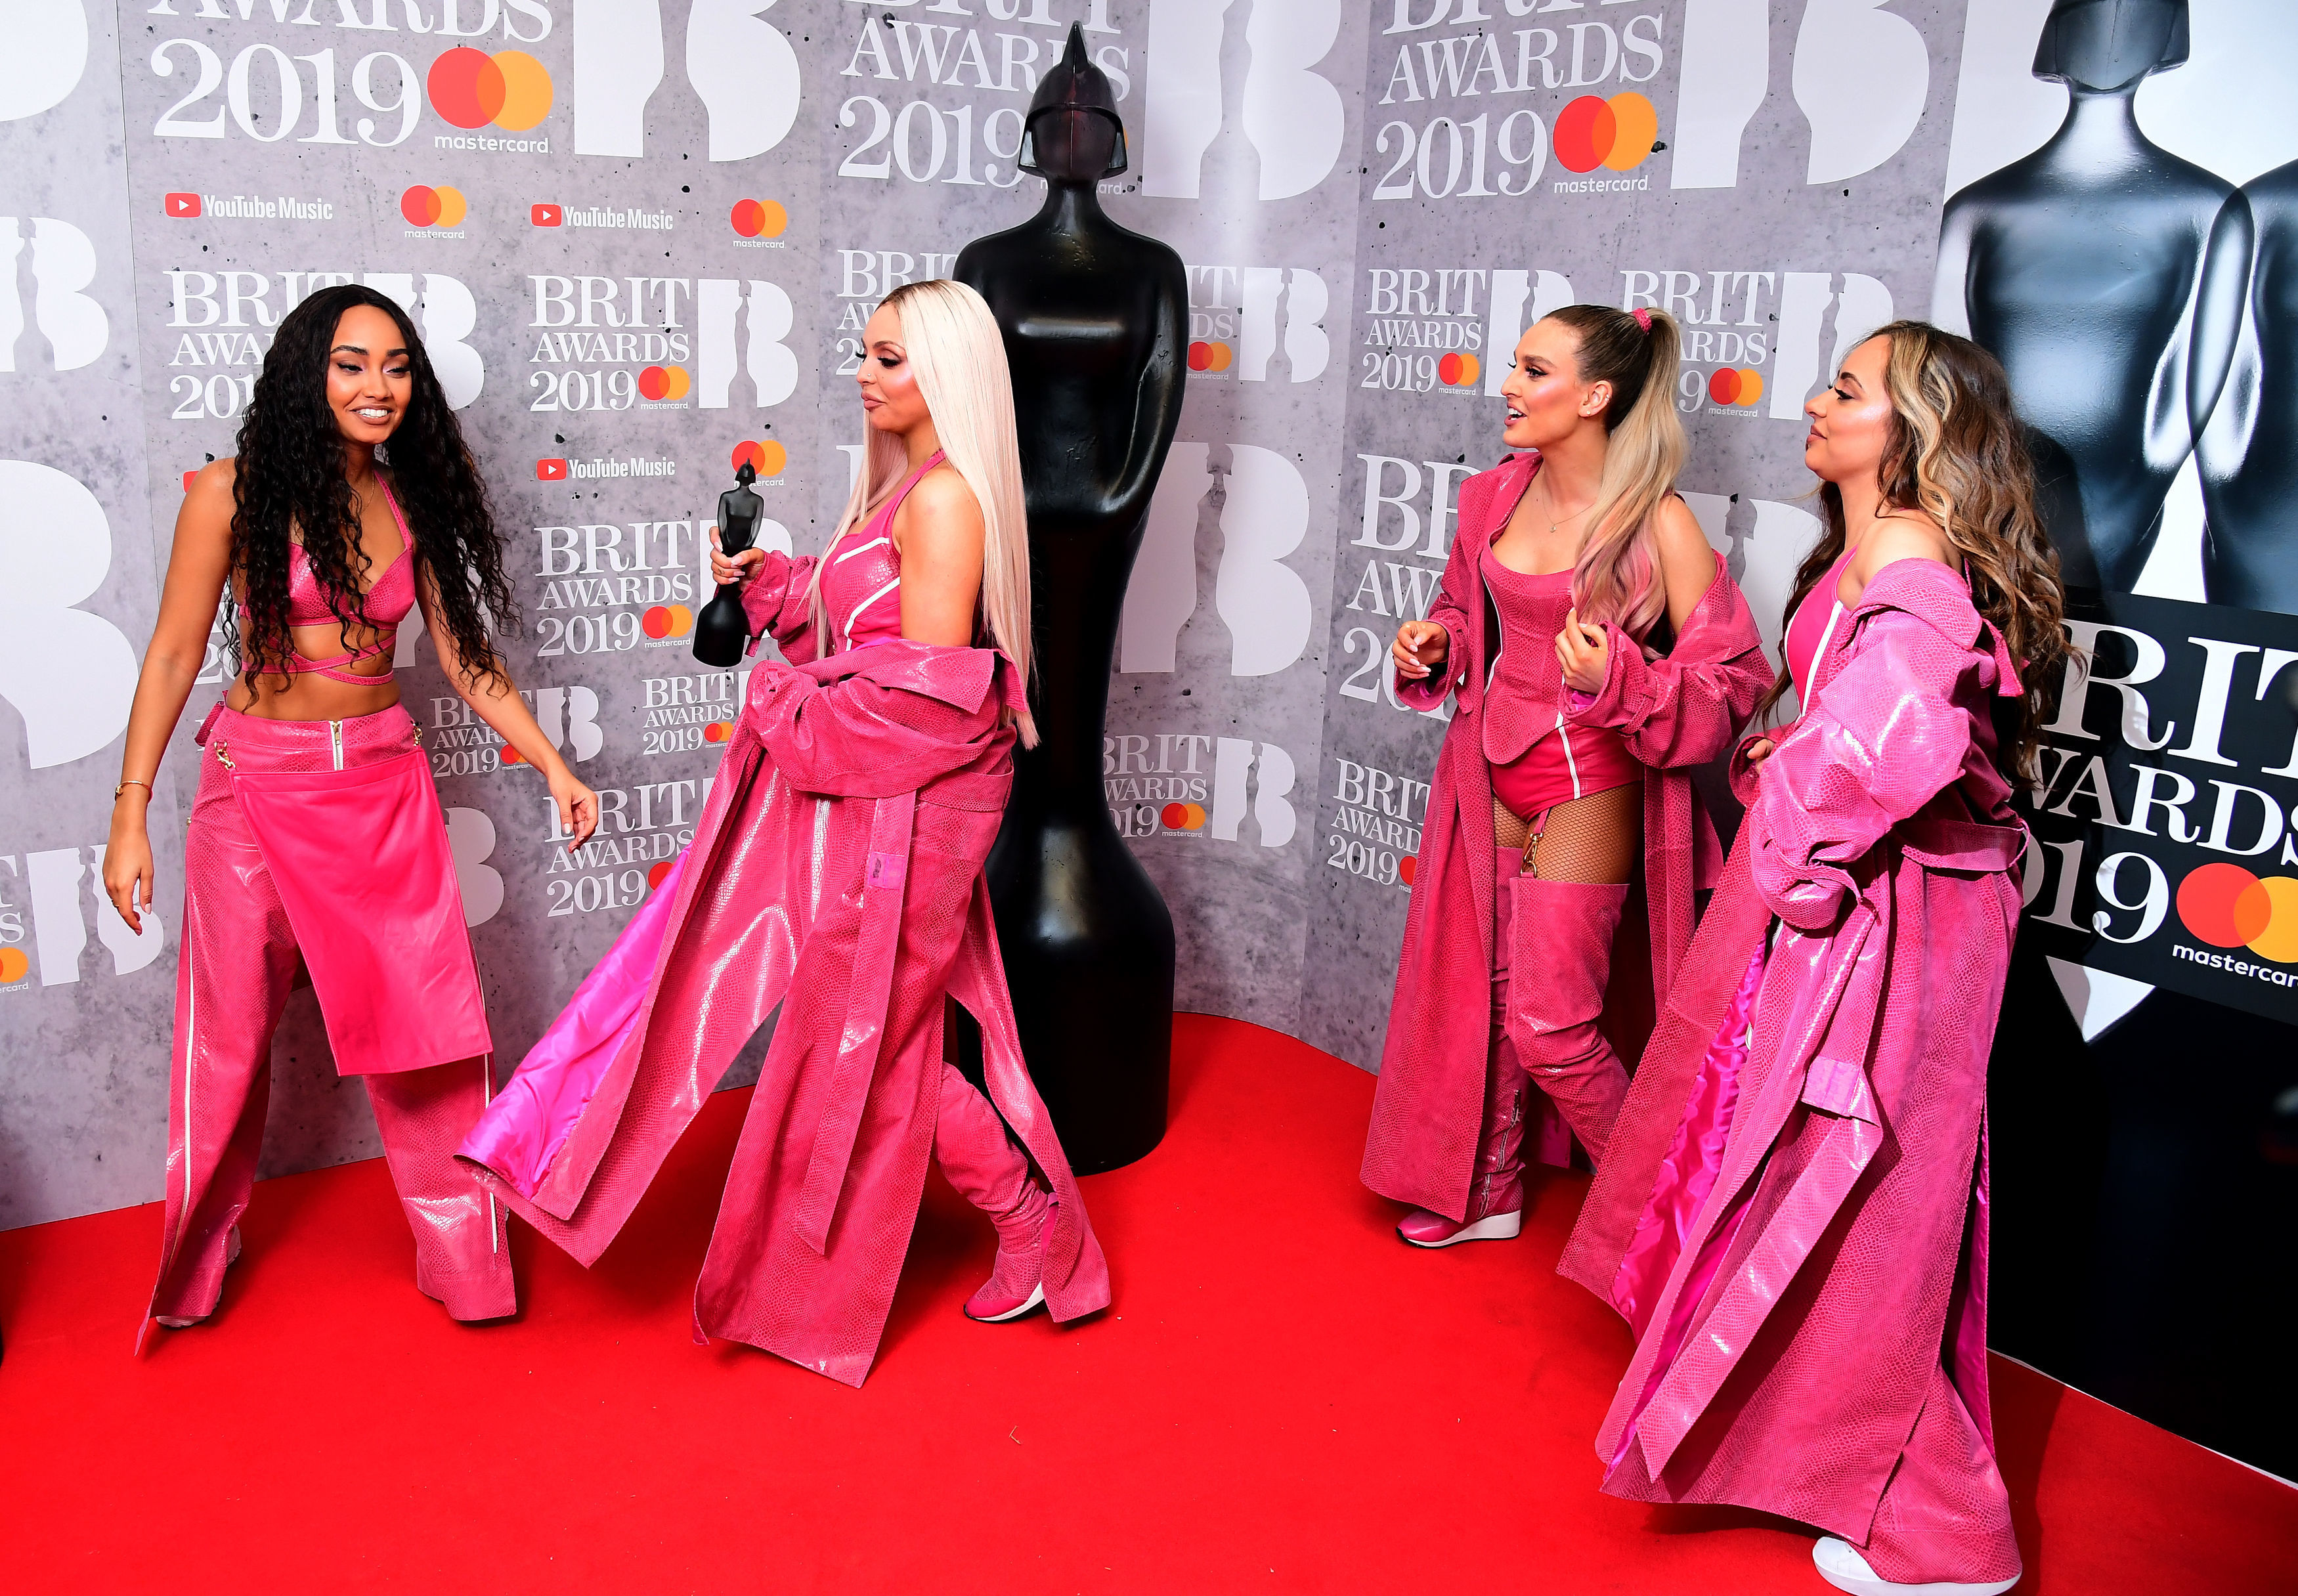 Leigh-Anne Pinnock, Jesy Nelson, Perrie Edwards and Jade Thirlwall of Little Mix with their Best British Video Brit Award